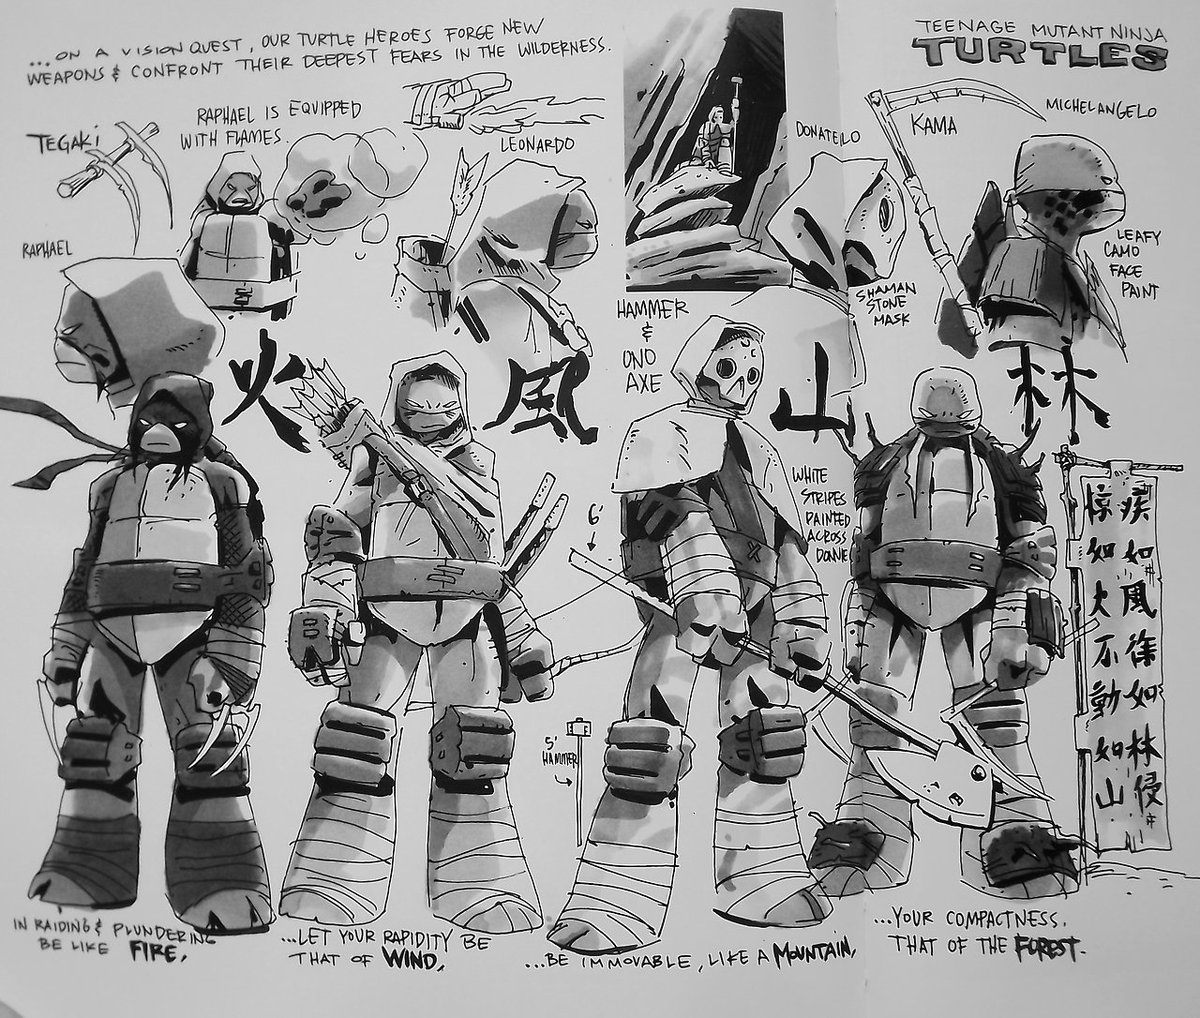 TMNT 2012 always had really great character sheets, they inspired me alot with how I'd draw mine every rare occasion. 